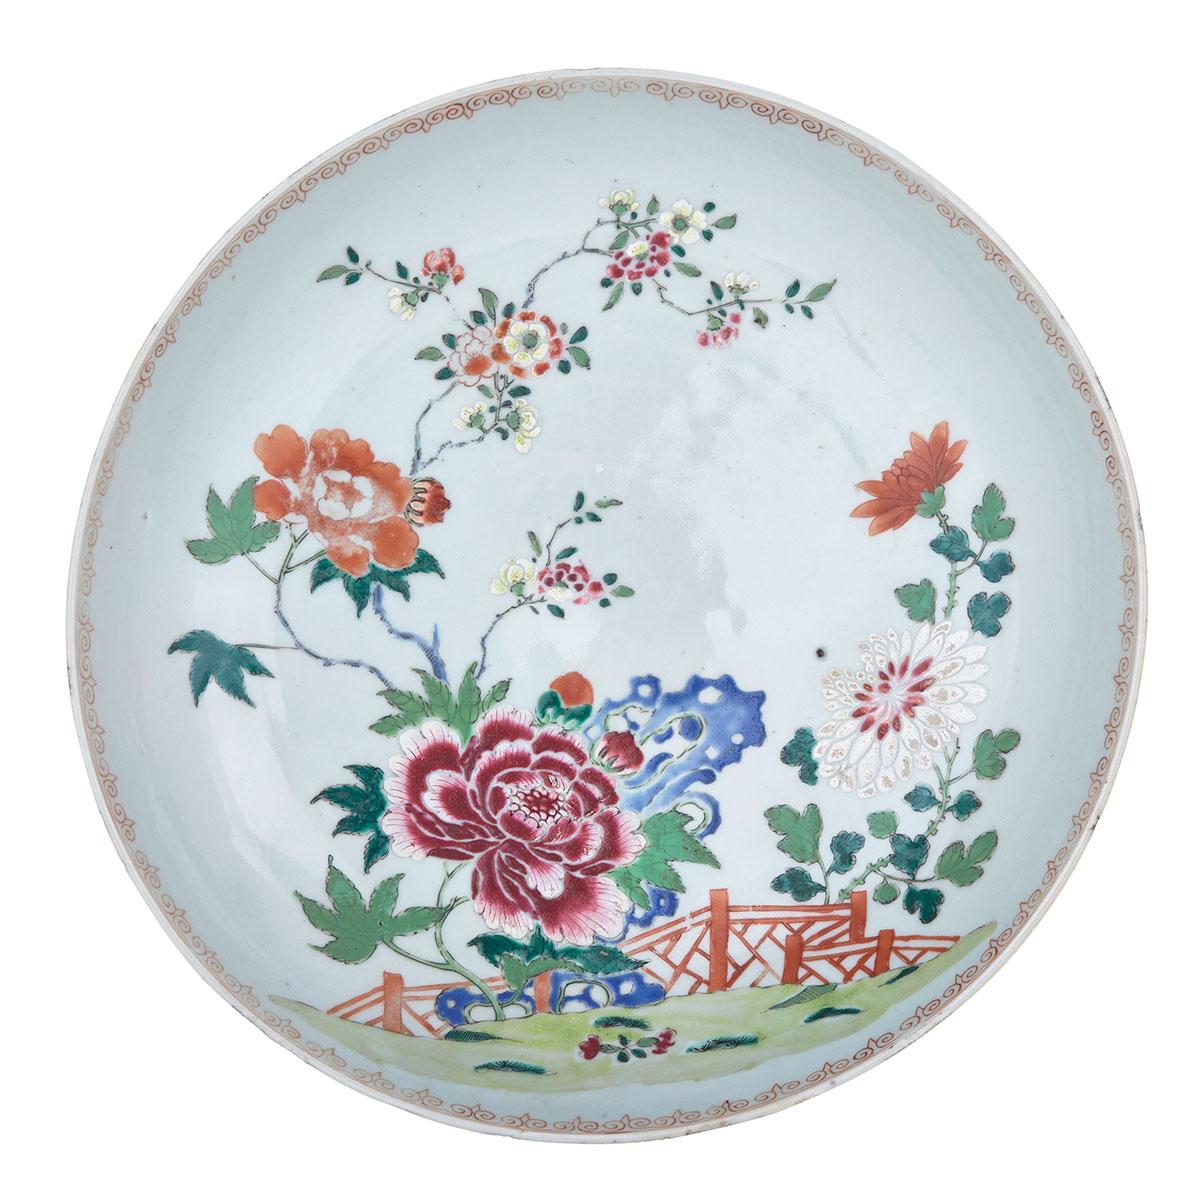 Large Export Famille Rose Shallow Bowl, 18th/19th Century